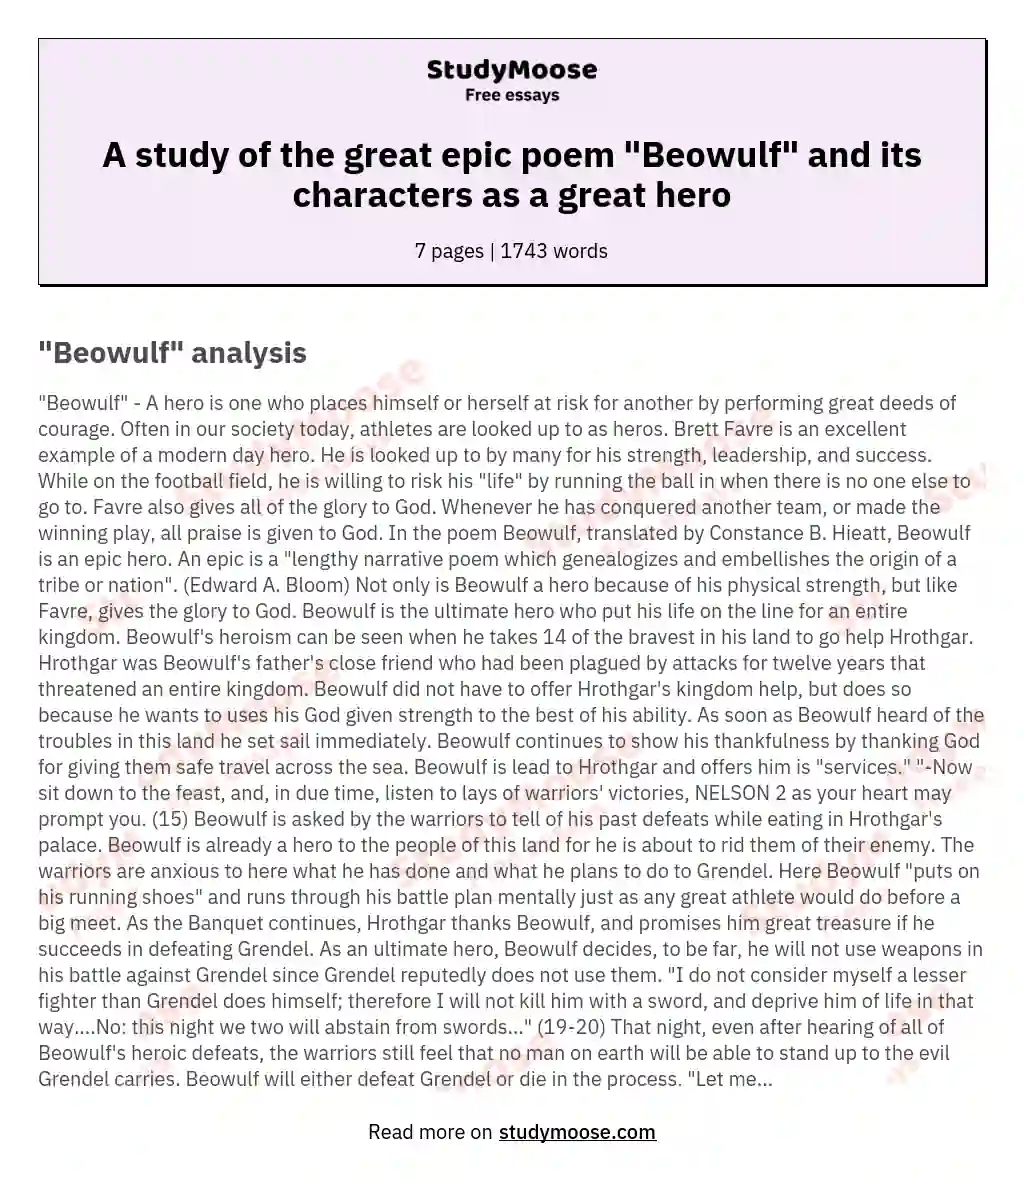 A study of the great epic poem "Beowulf" and its characters as a great hero